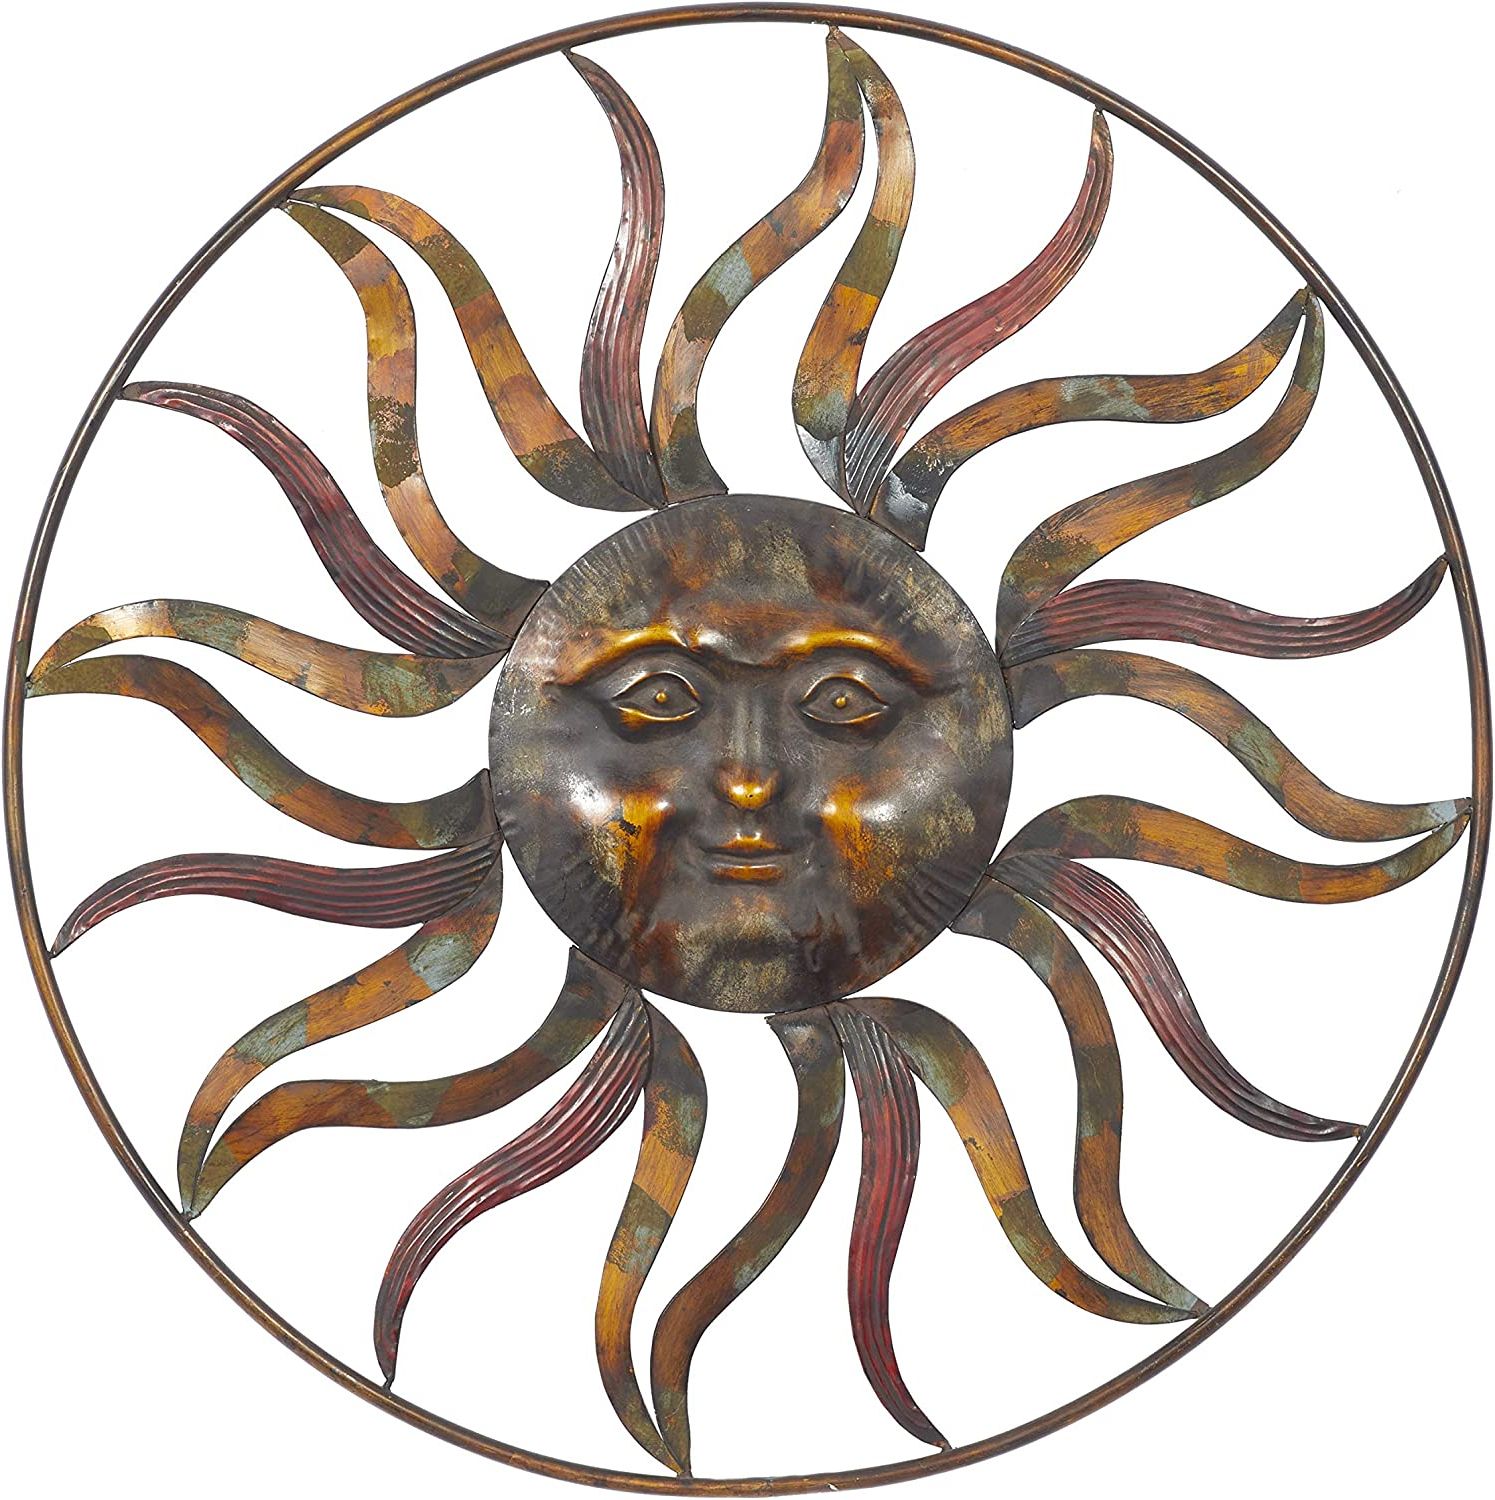 The Sun Wall Art Within Most Up To Date Benzara 97917 Metal Sun Wall Decor Feel The Warmth Of Sun : Amazon (View 15 of 15)